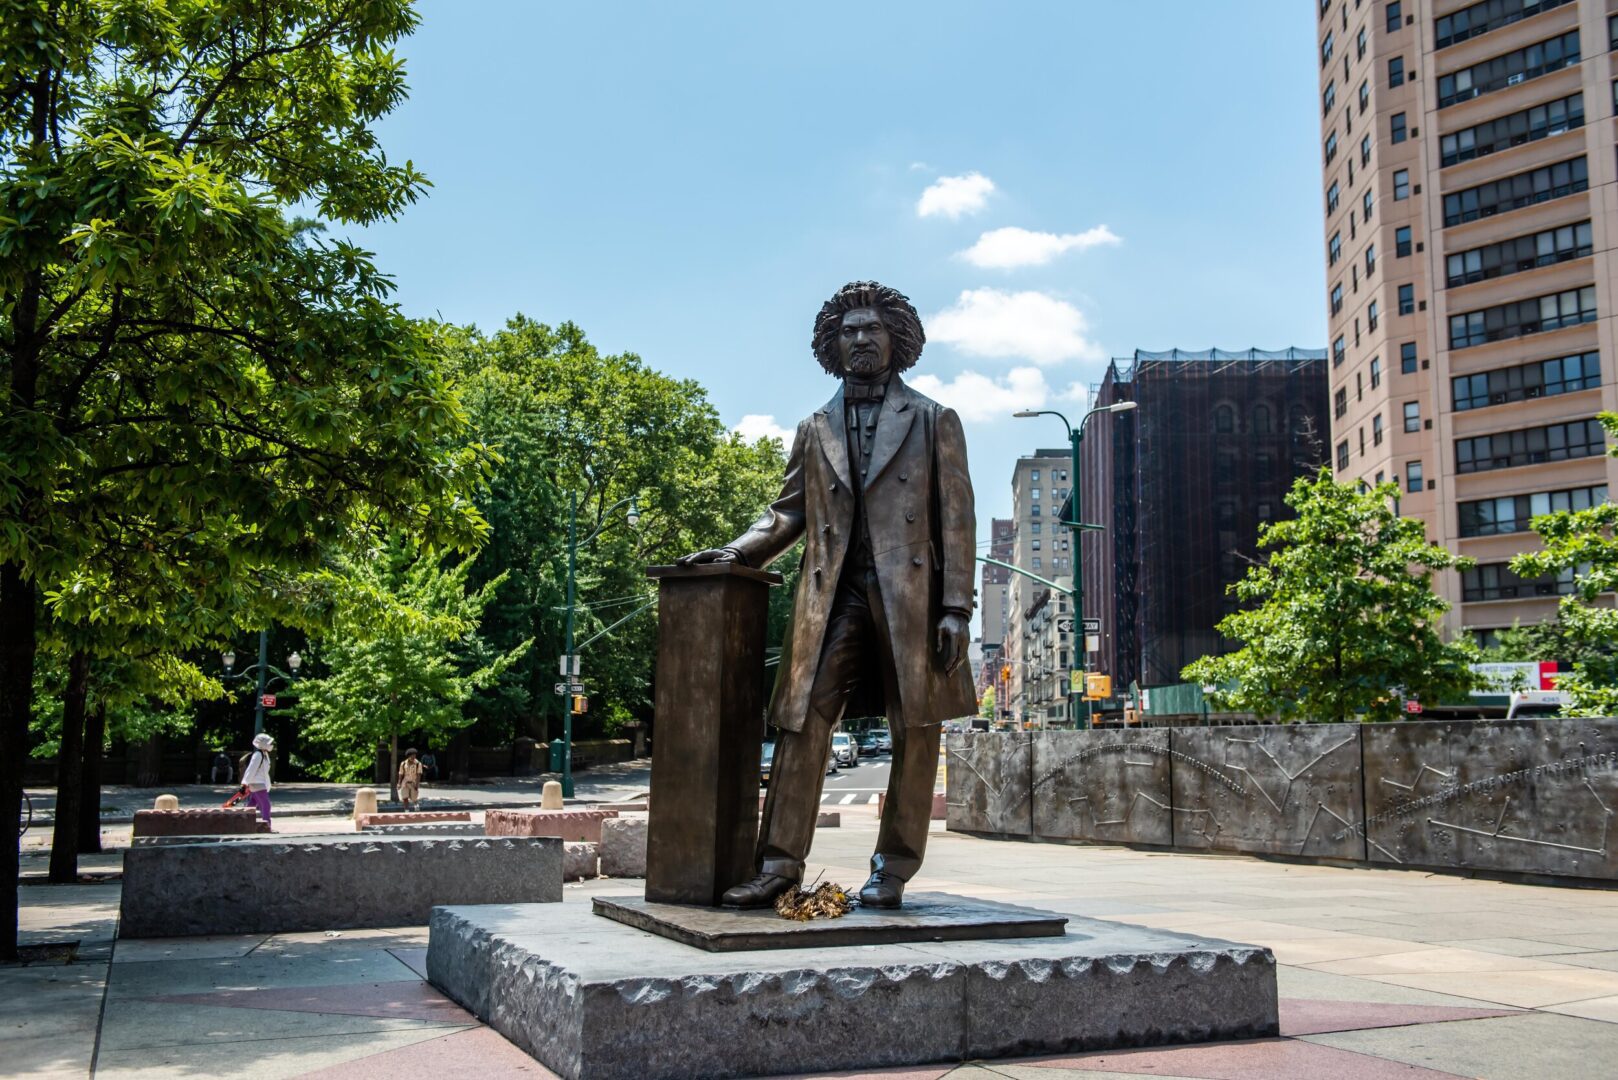 Statue of frederick douglass in a city park with trees and buildings in the background.